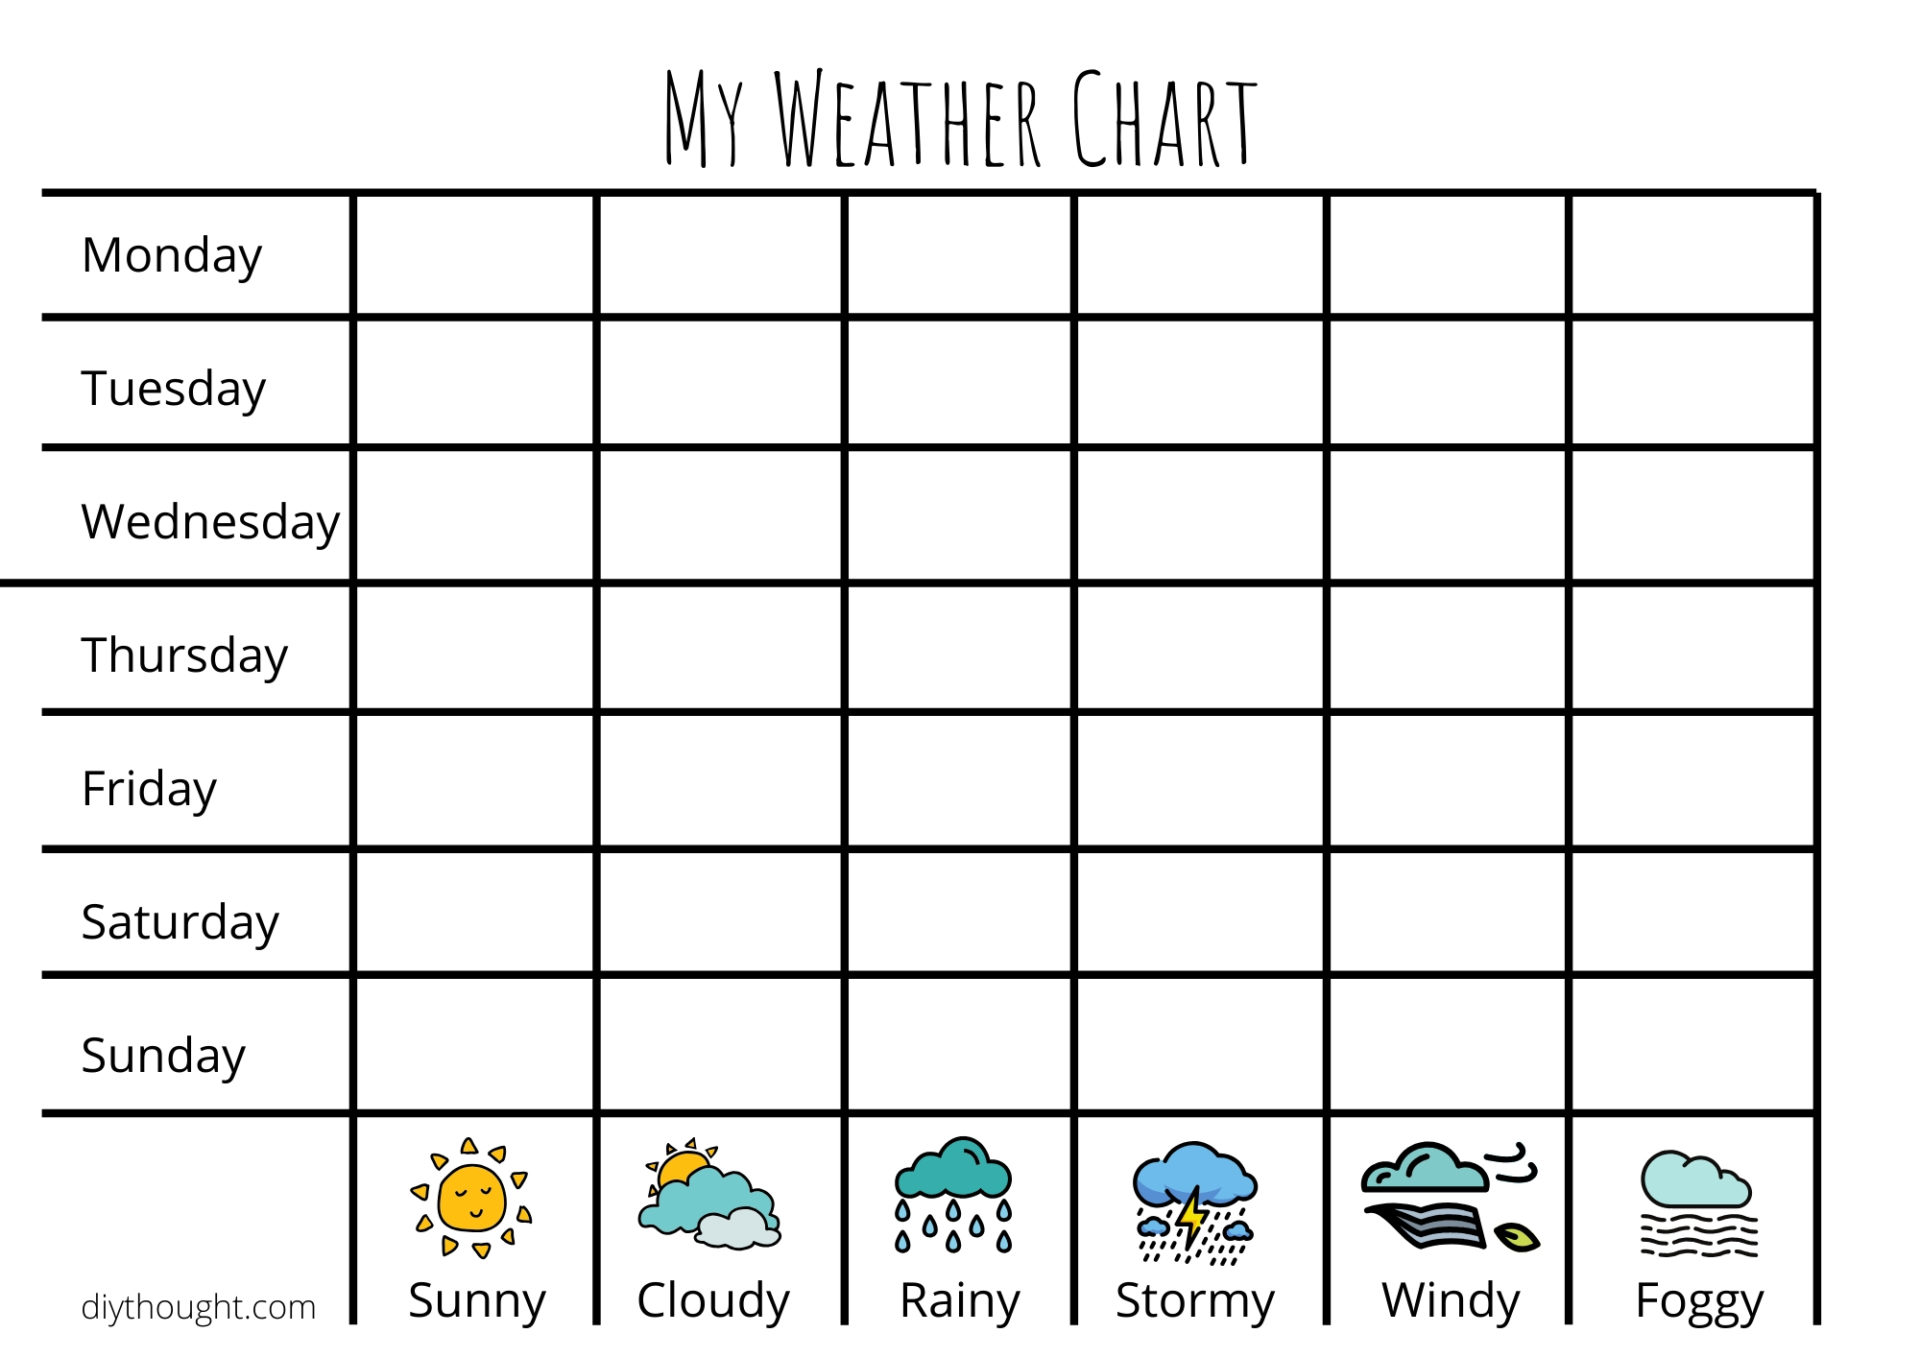 My Weather Chart diy Thought